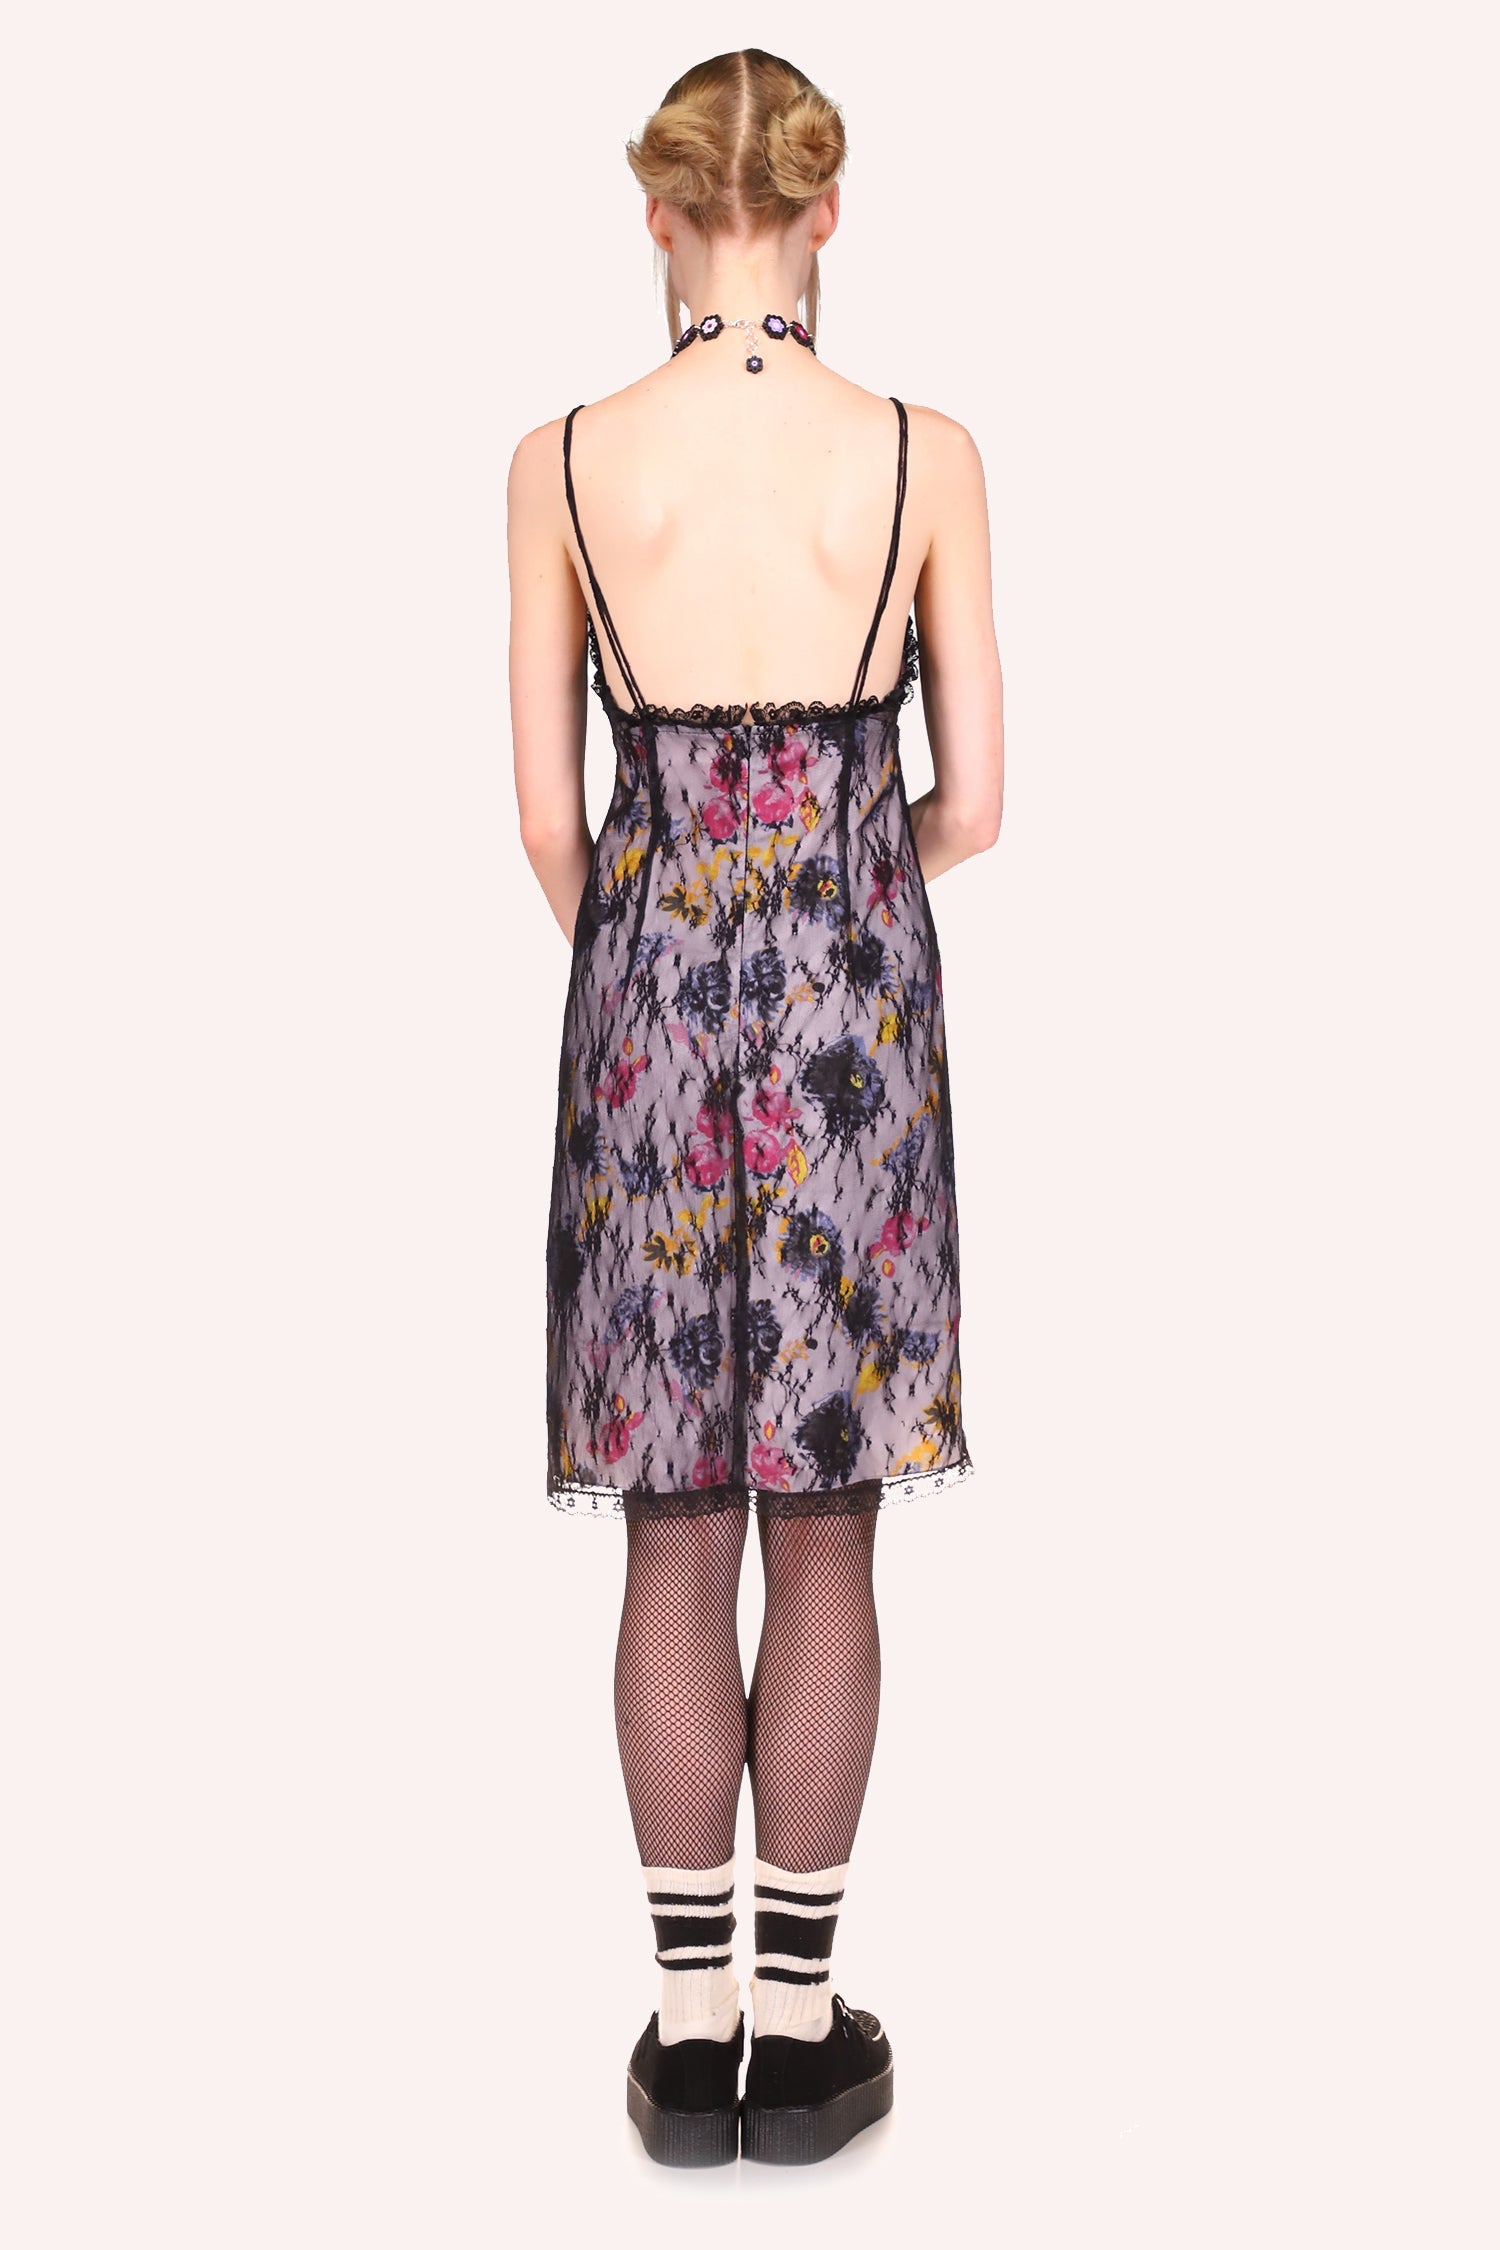 Sketch Flower and Lace Heart Dress, sleeveless, pattern of flowers, 2 straps, hems with black lace, low cut on the back